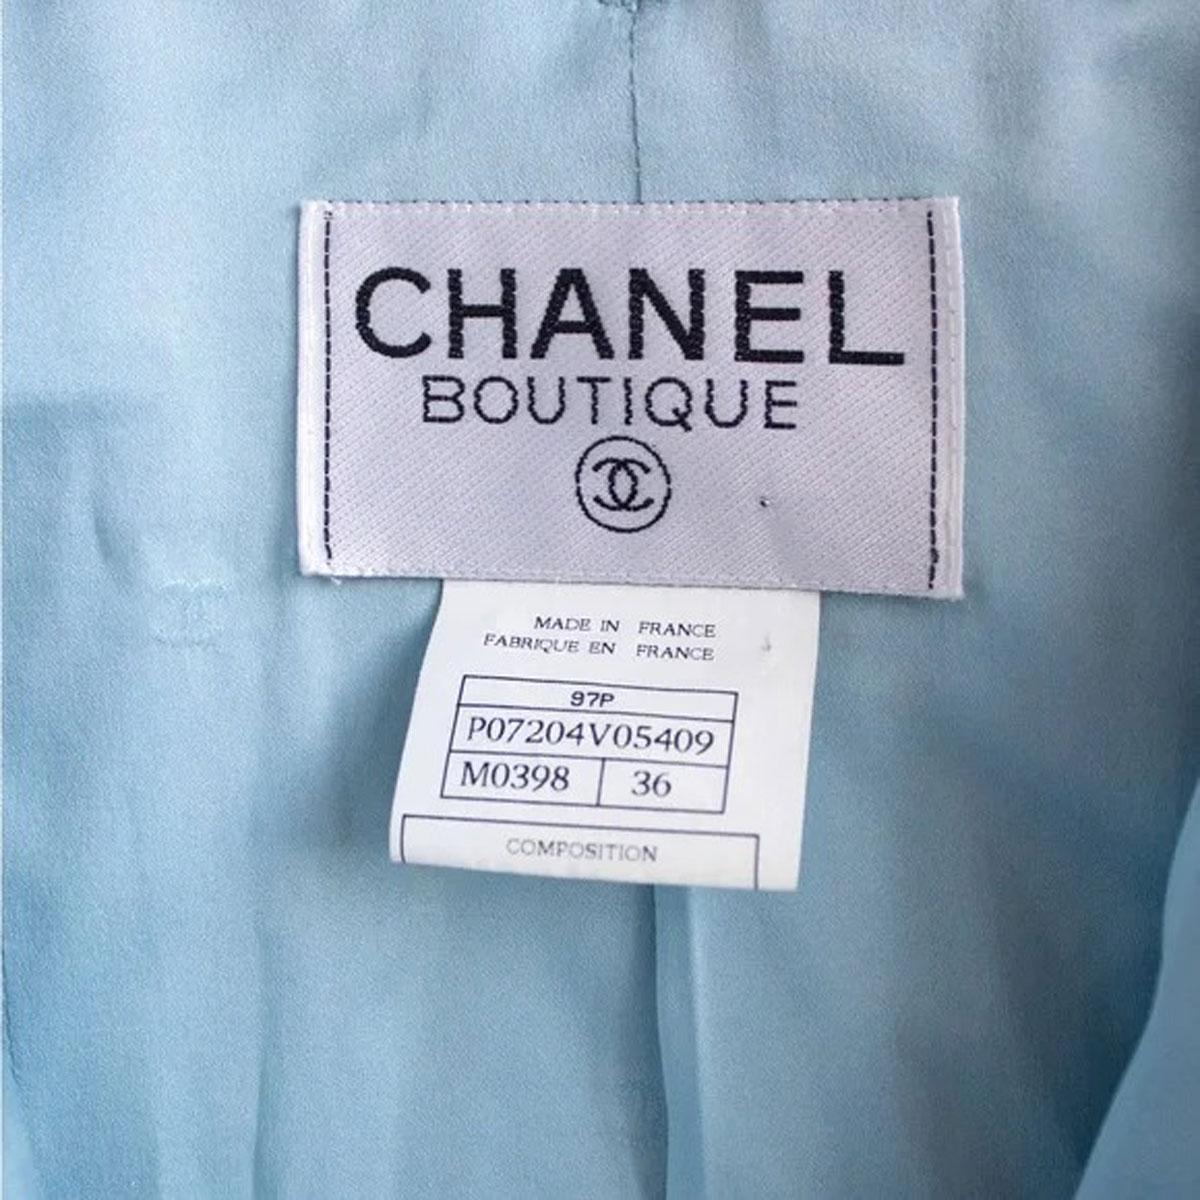 Chanel 1997 Vintage Baby Blue Tweed Jacket Museum Piece Seen on Princess Diana  For Sale 11